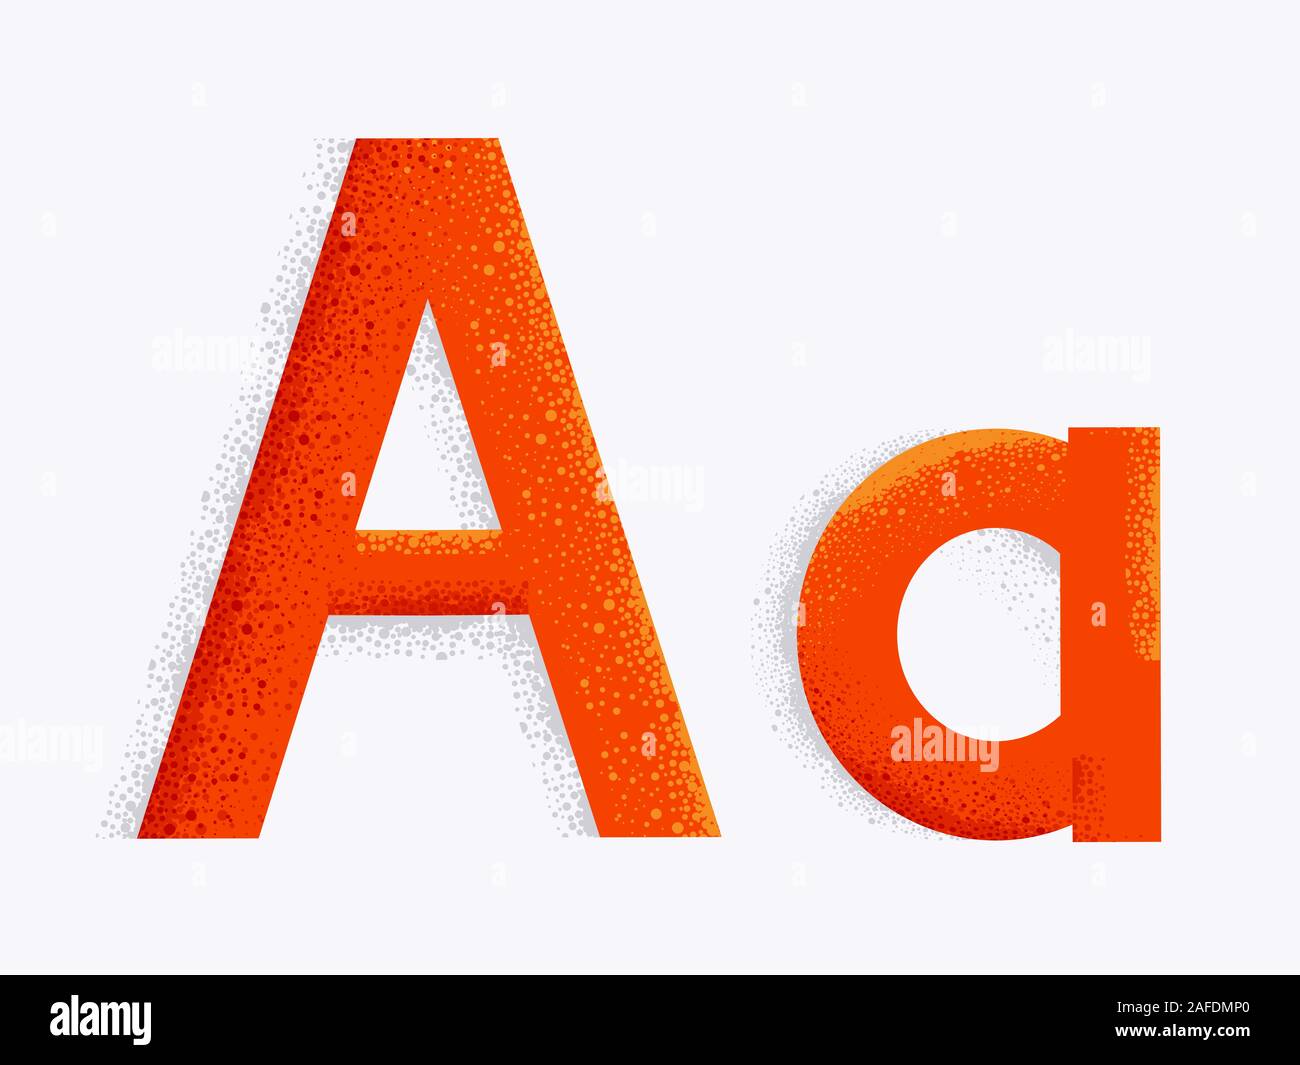 Illustration of Decorative Alphabet with Capital and Small Letter A and Dust Particle Effect Stock Photo